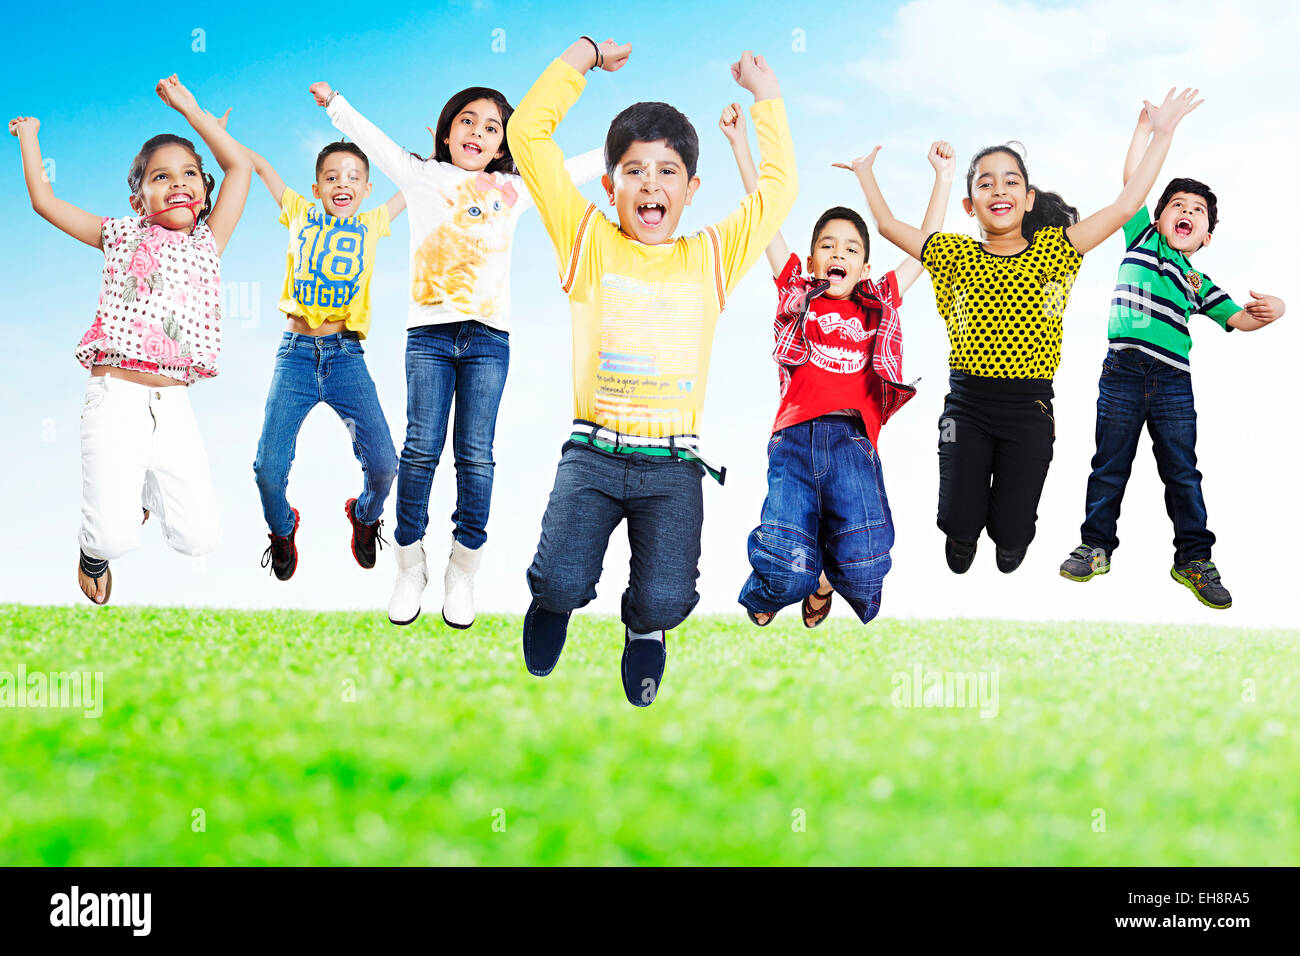 indian group crowds kids Friends park Jumping shouting fun Stock Photo